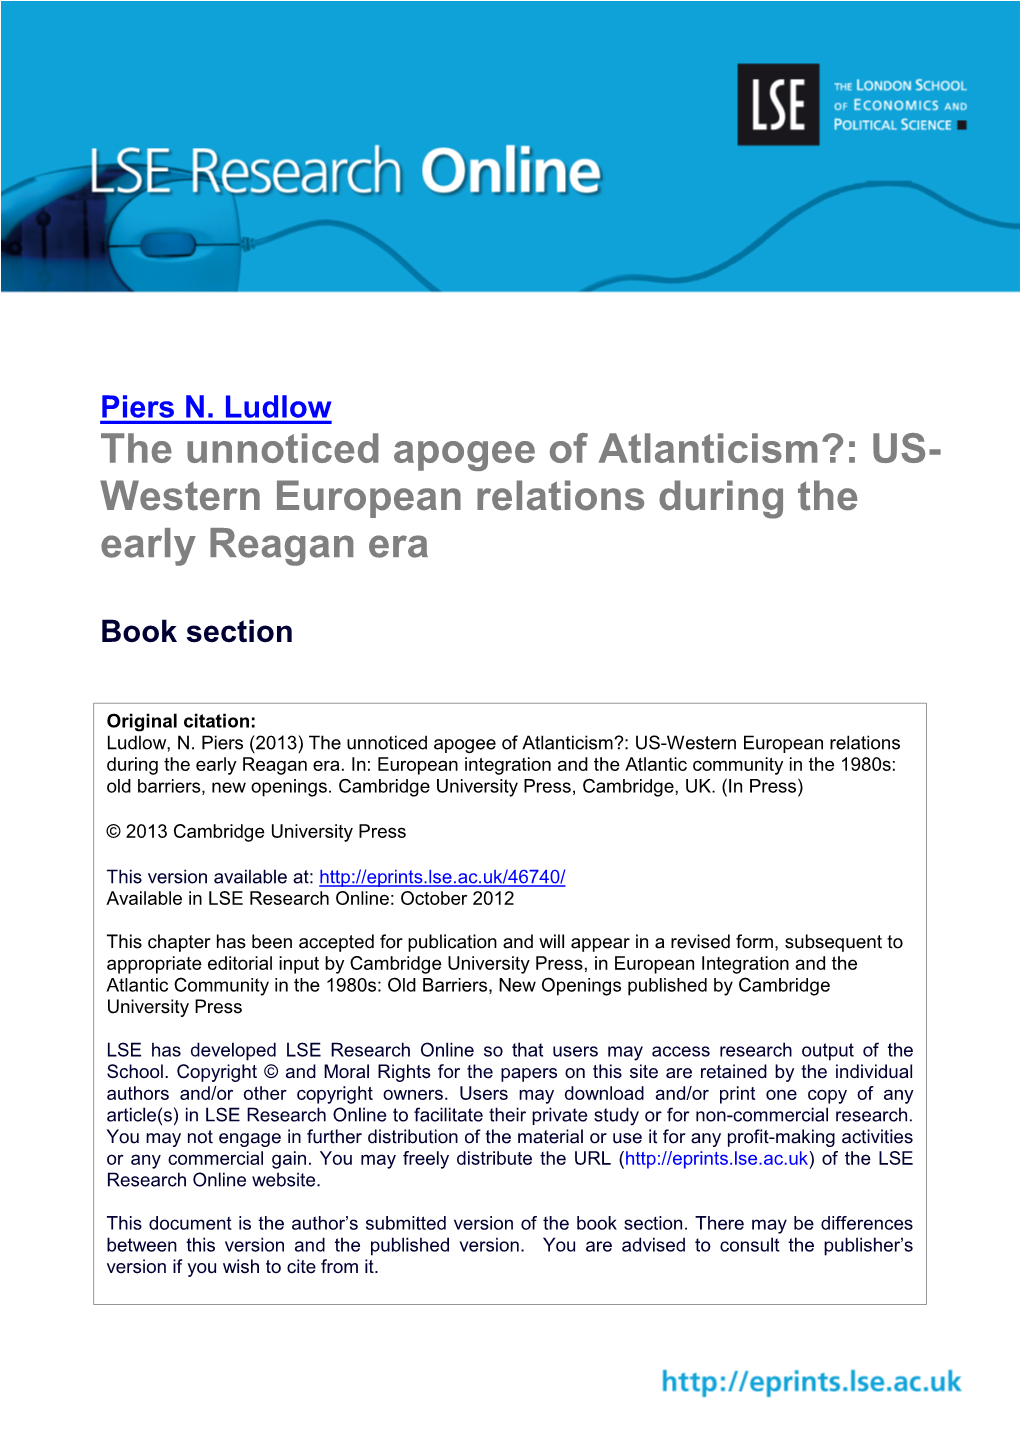 US- Western European Relations During the Early Reagan Era